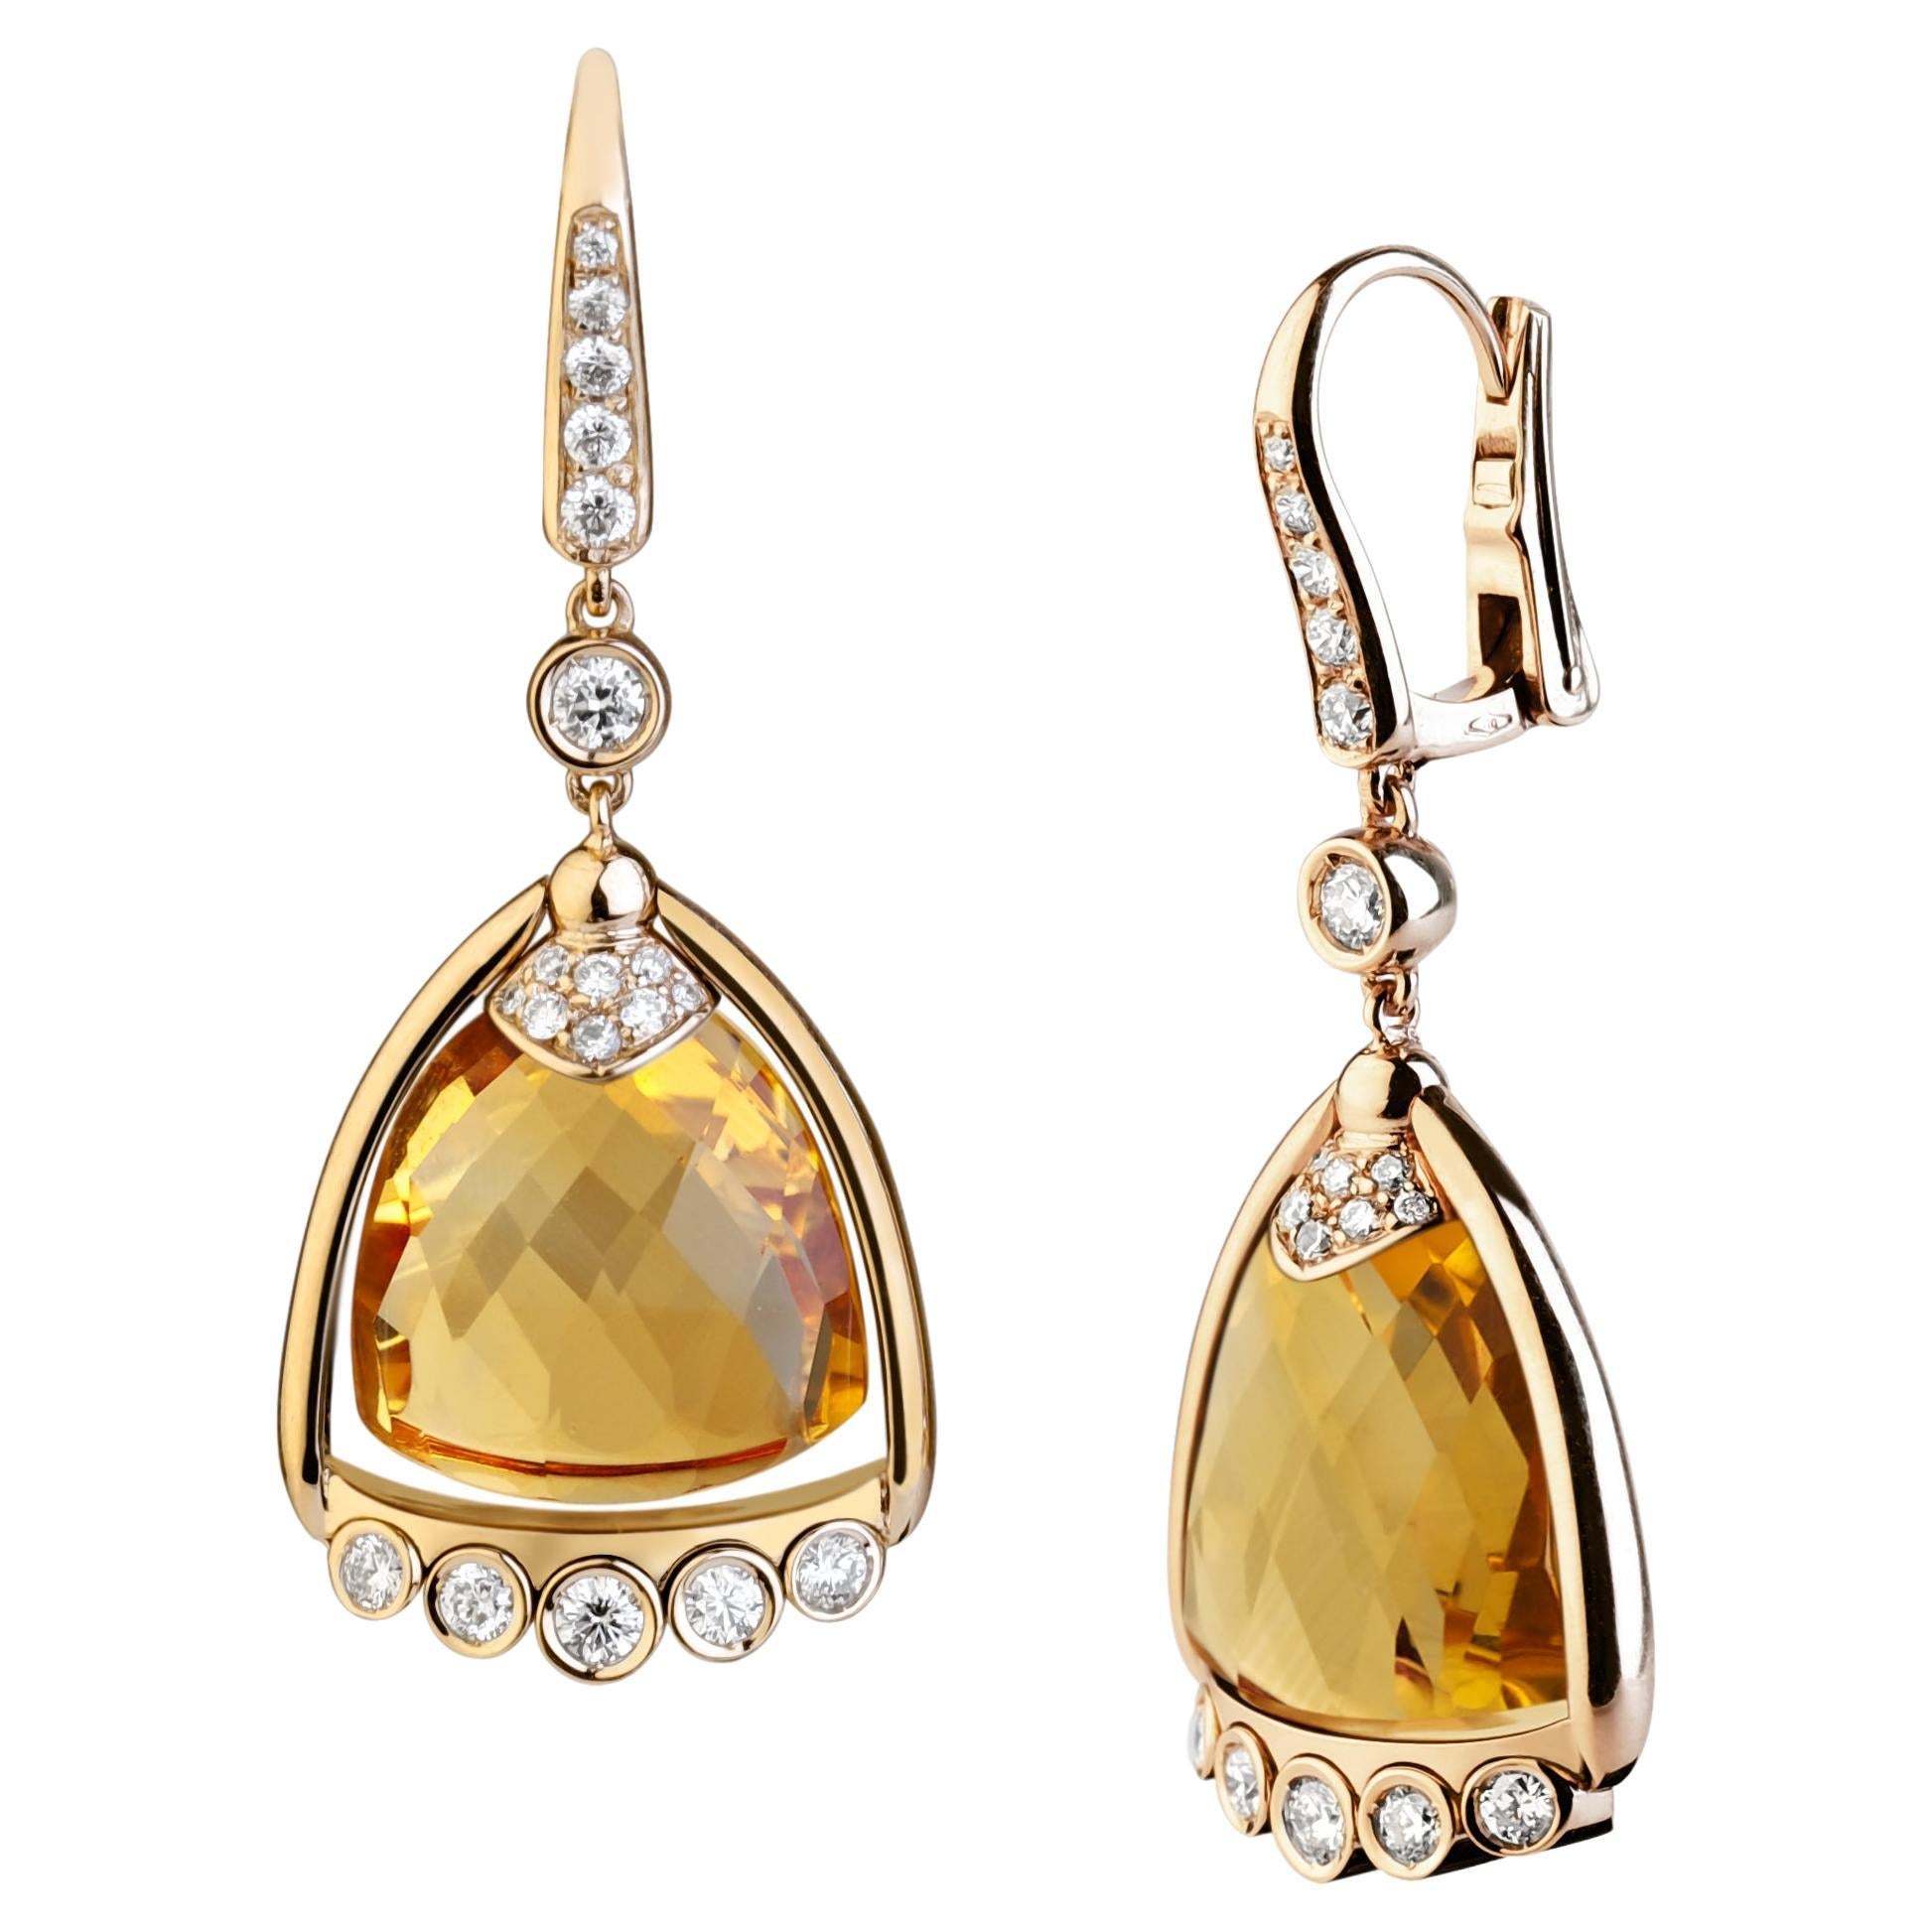 Bell Collection by Angeletti, Gold Earrings with Citrine and Diamonds